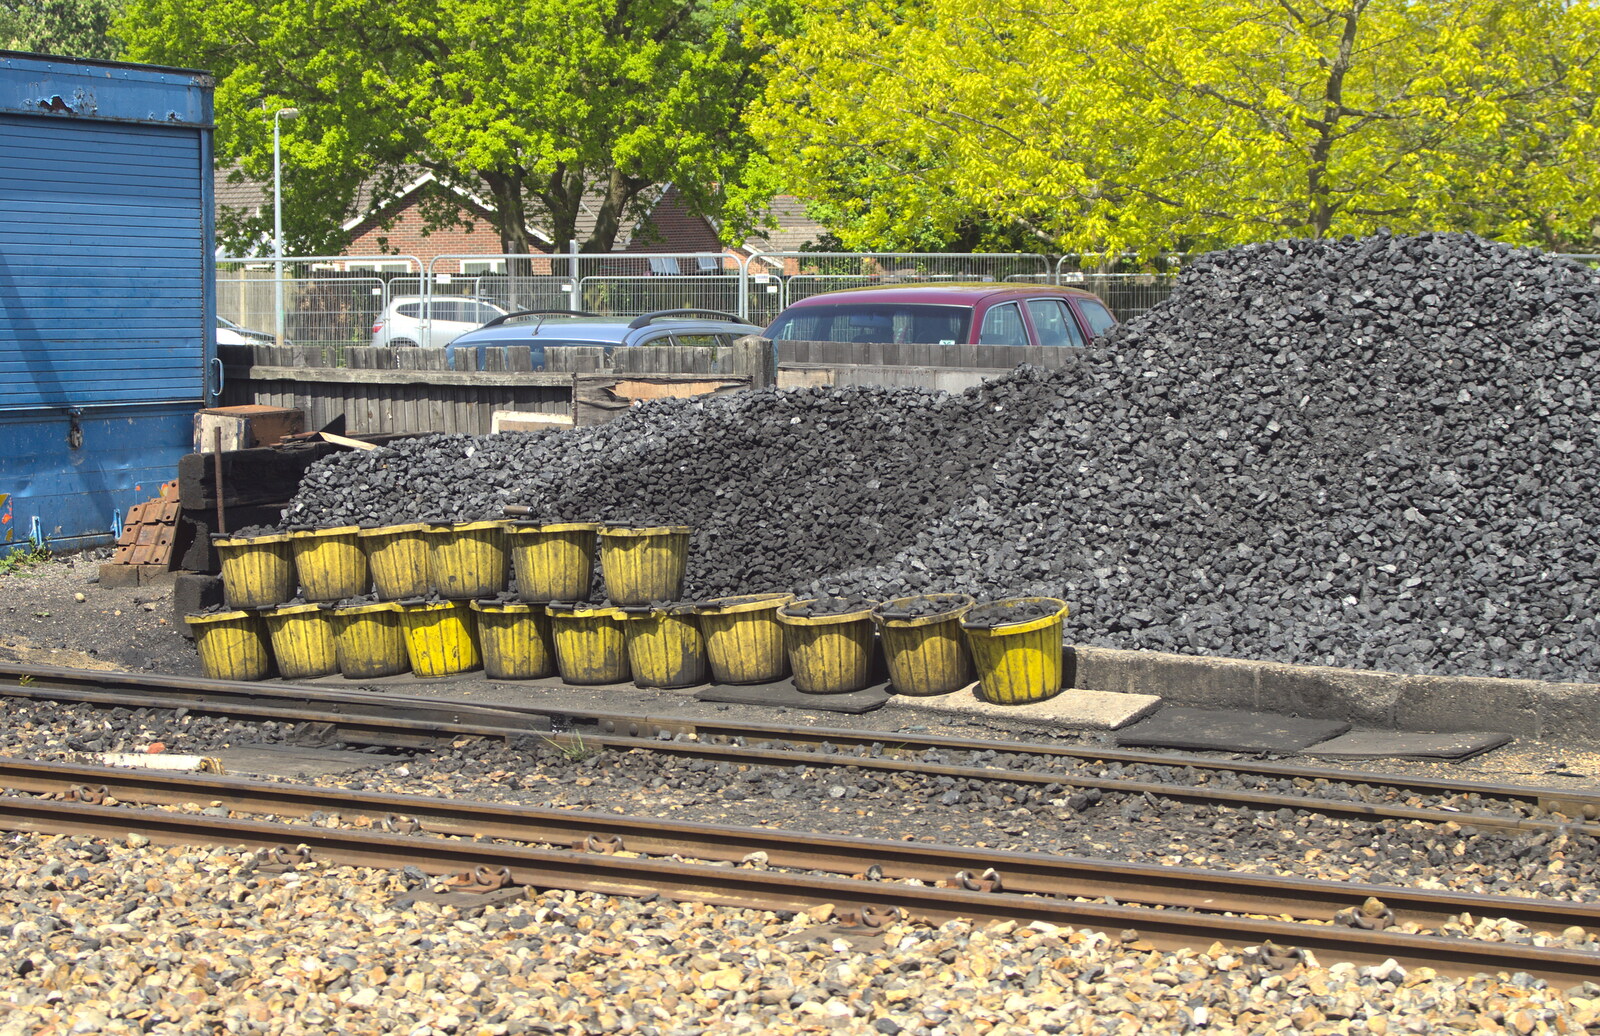 One or two buckets, and a pile of coal from The Bure Valley Railway, Aylsham, Norfolk - 26th May 2013